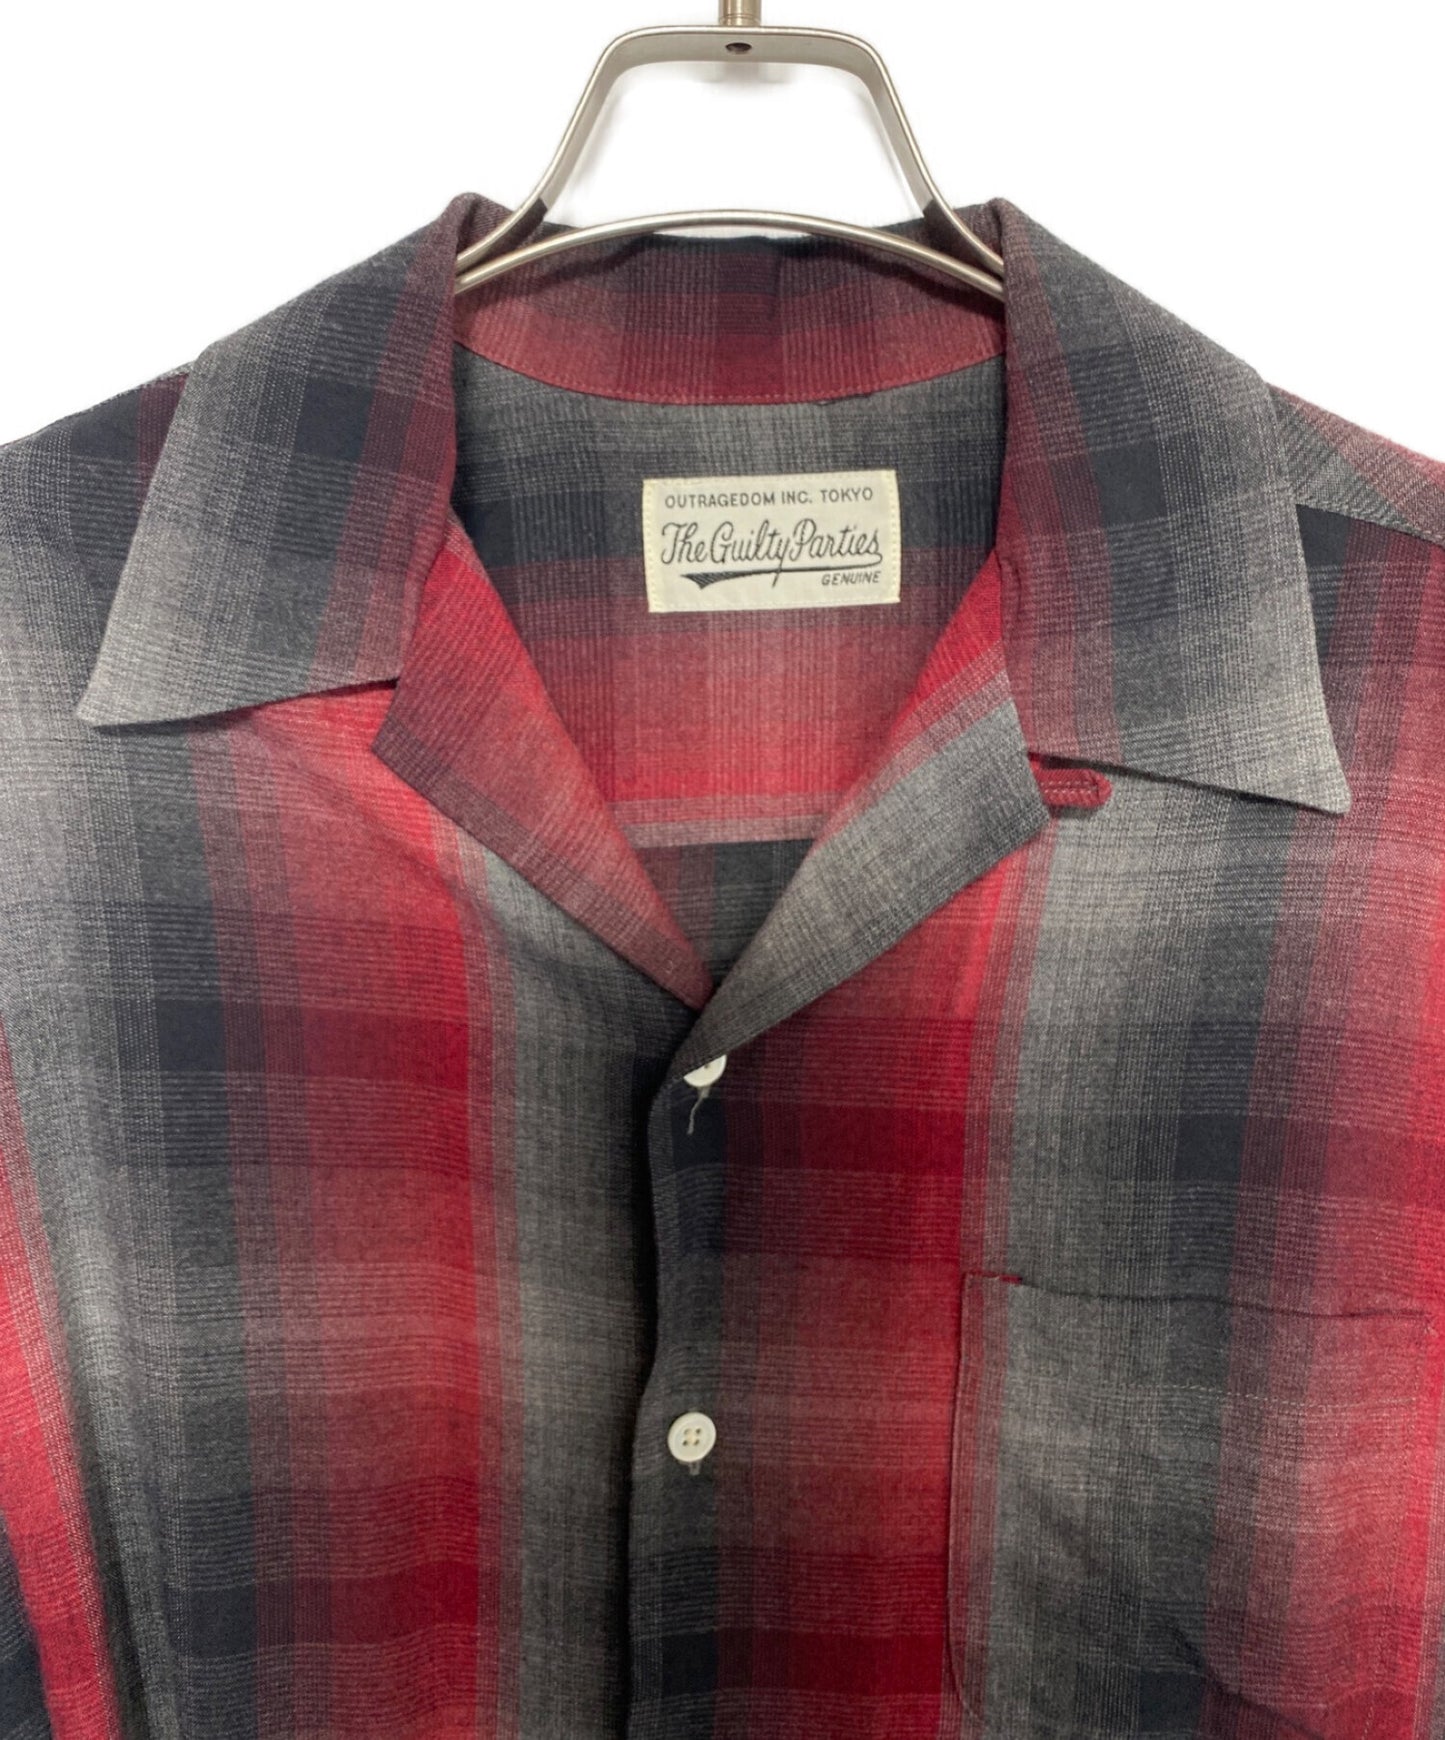 [Pre-owned] WACKO MARIA flannel open-collared shirt